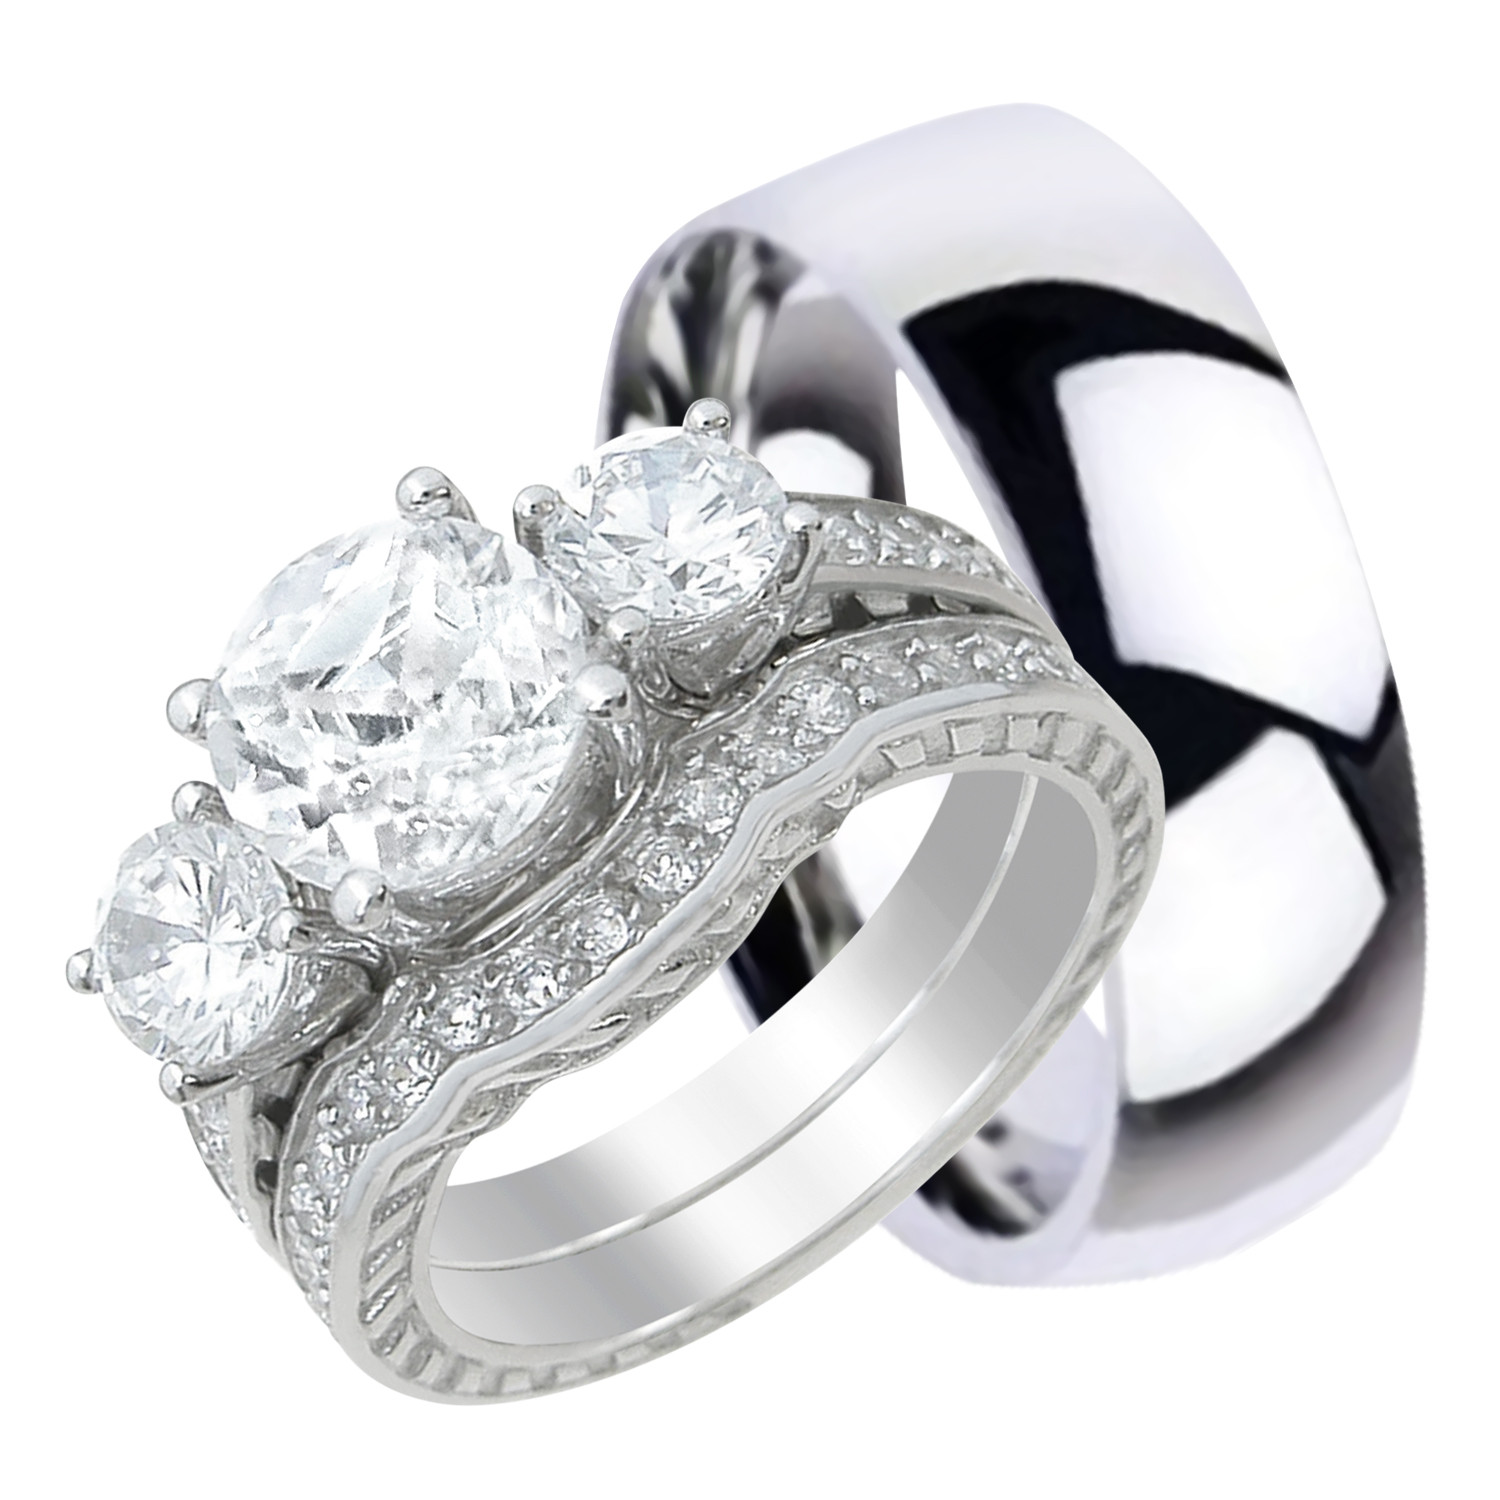 Walmart Wedding Rings For Him
 His and Hers Wedding Ring Sets Matching Silver Titanium